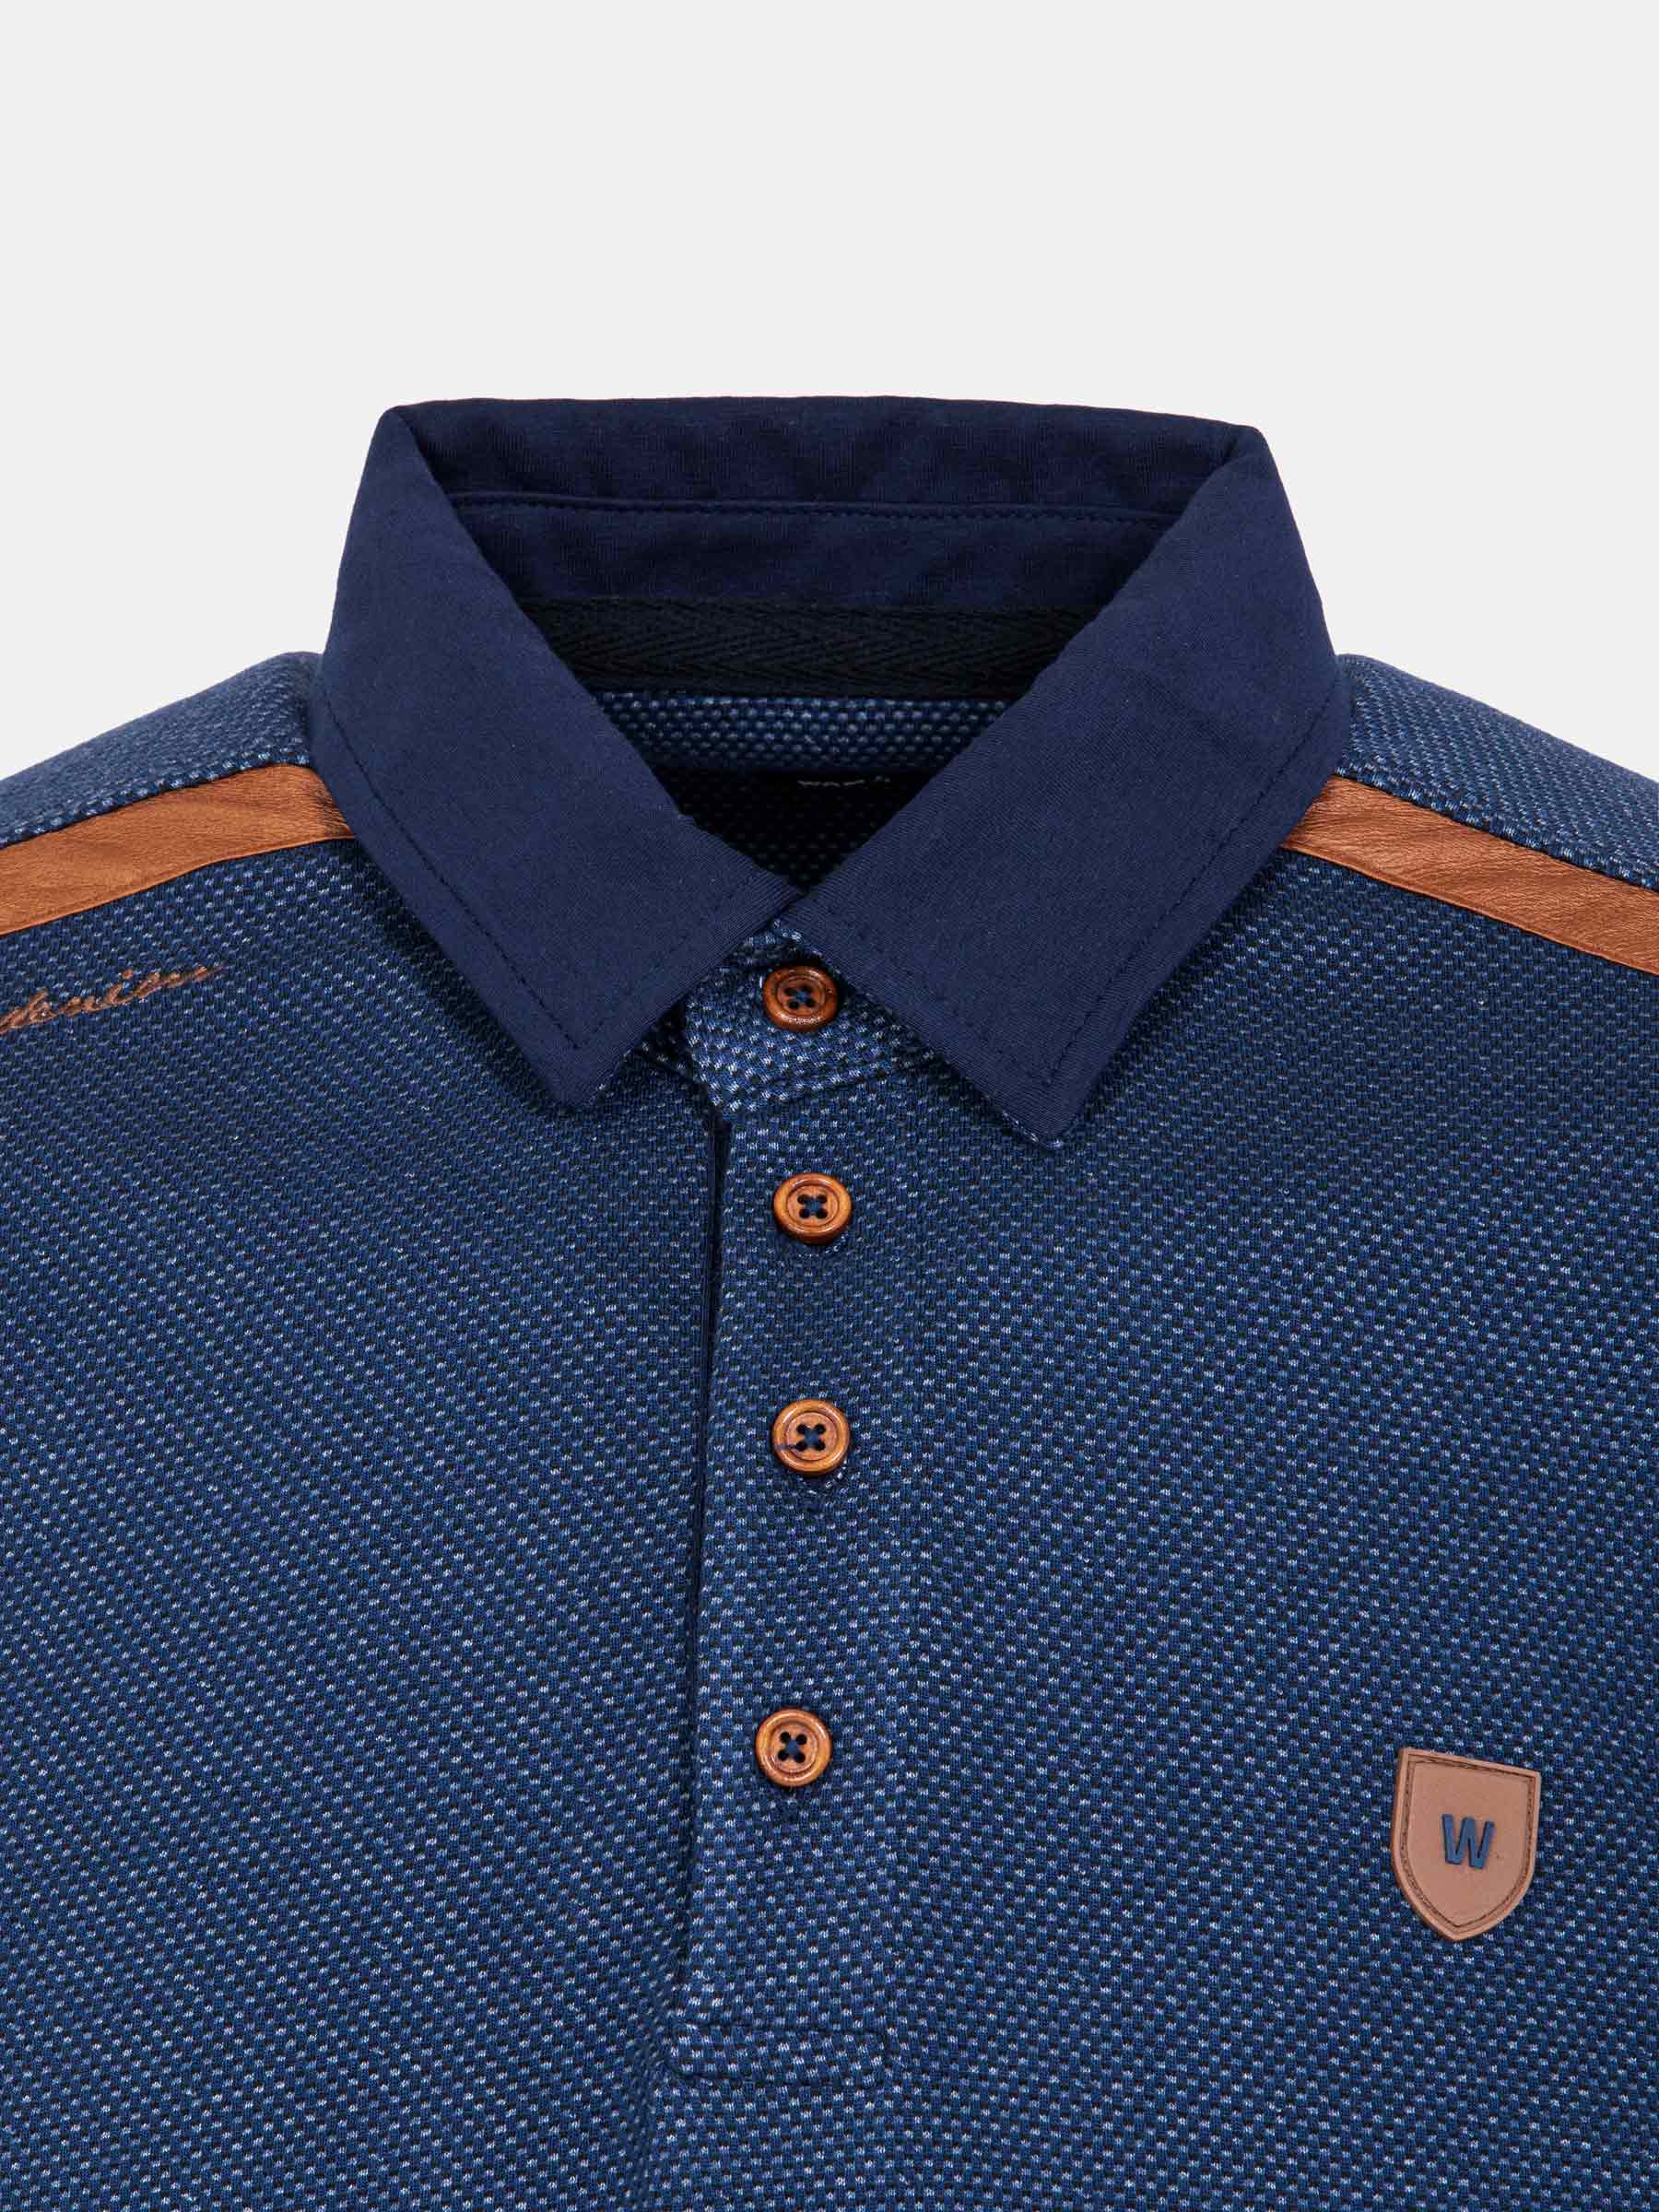 Playas Polo Collared Navy Sweater